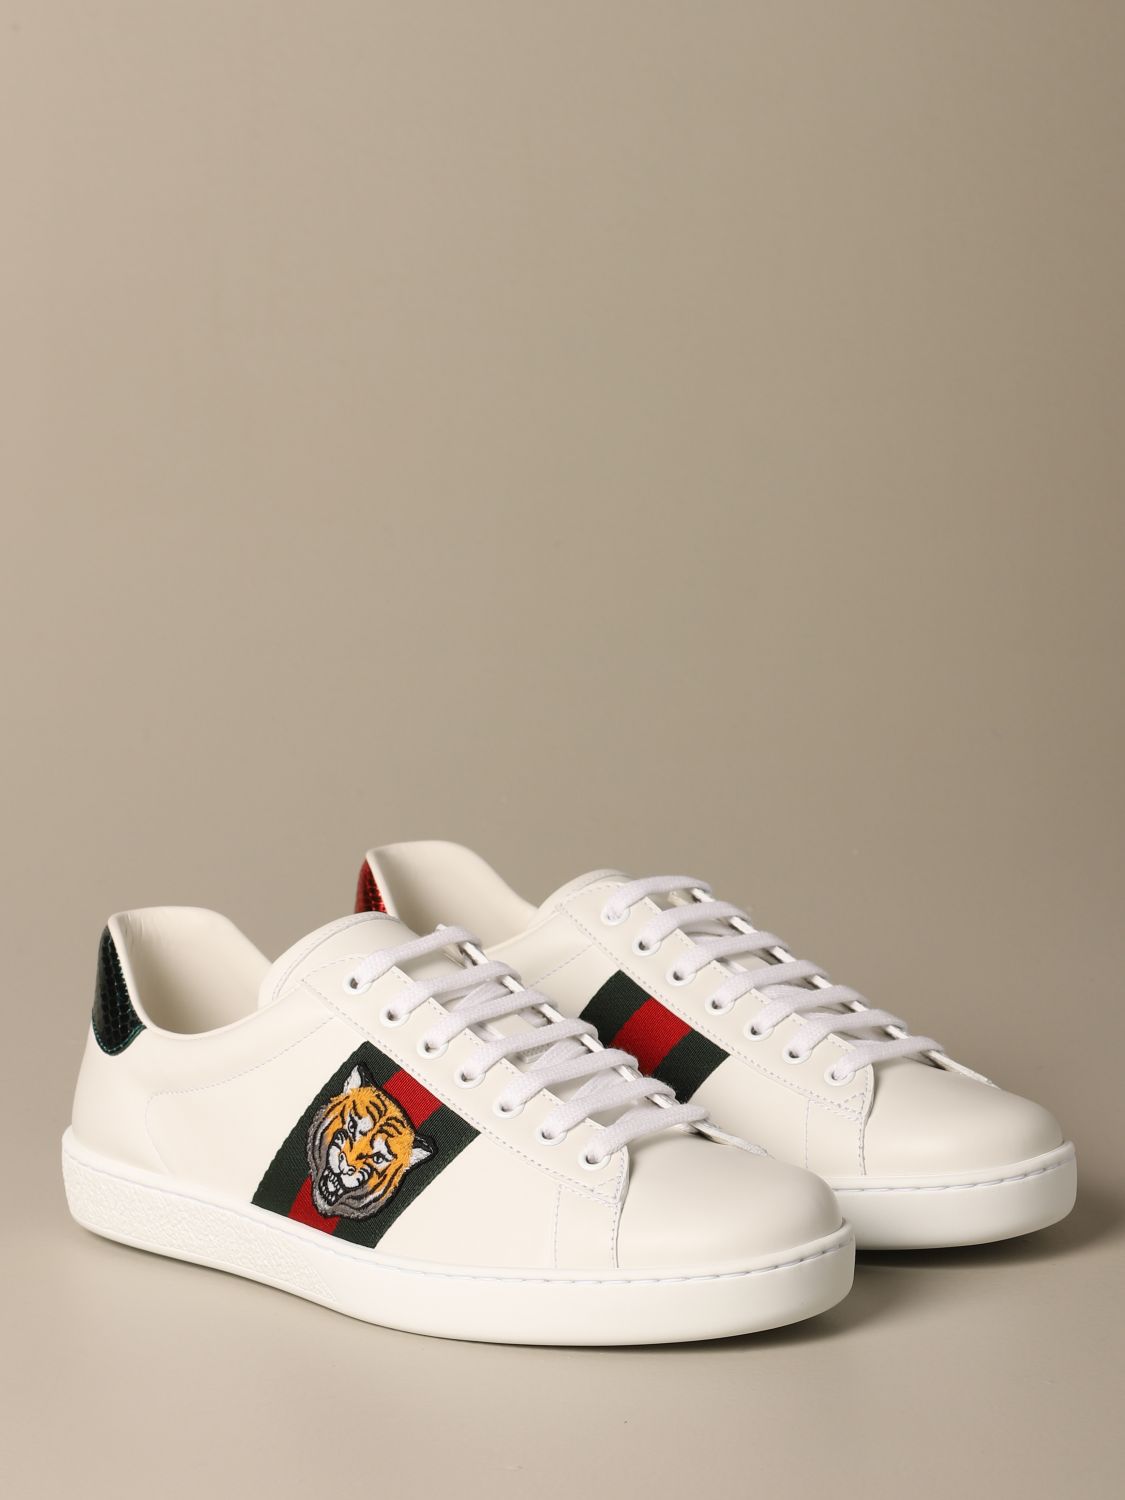 Ace sneakers with bands and tiger patch | Sneakers Gucci Men White | Sneakers Gucci 457132 02JP0 GIGLIO.COM